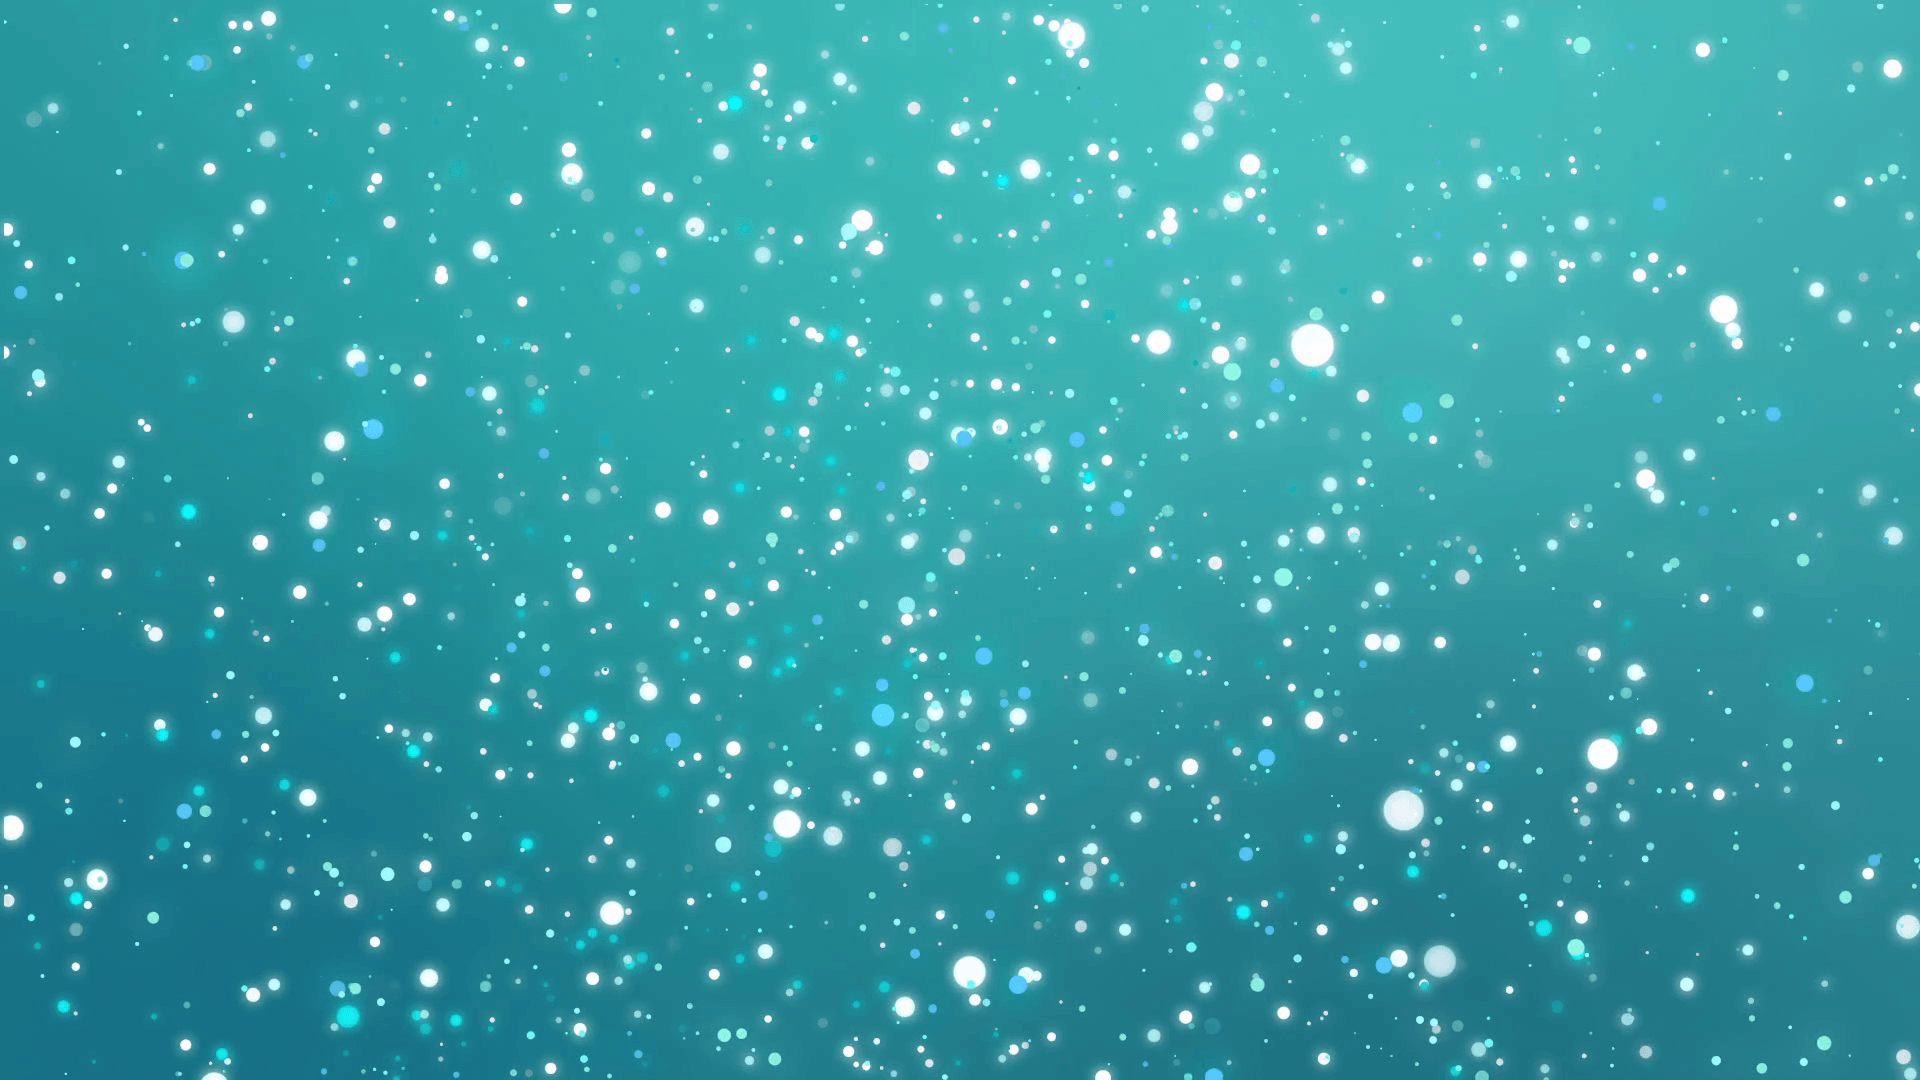 Teal Backgrounds download 1920x1080